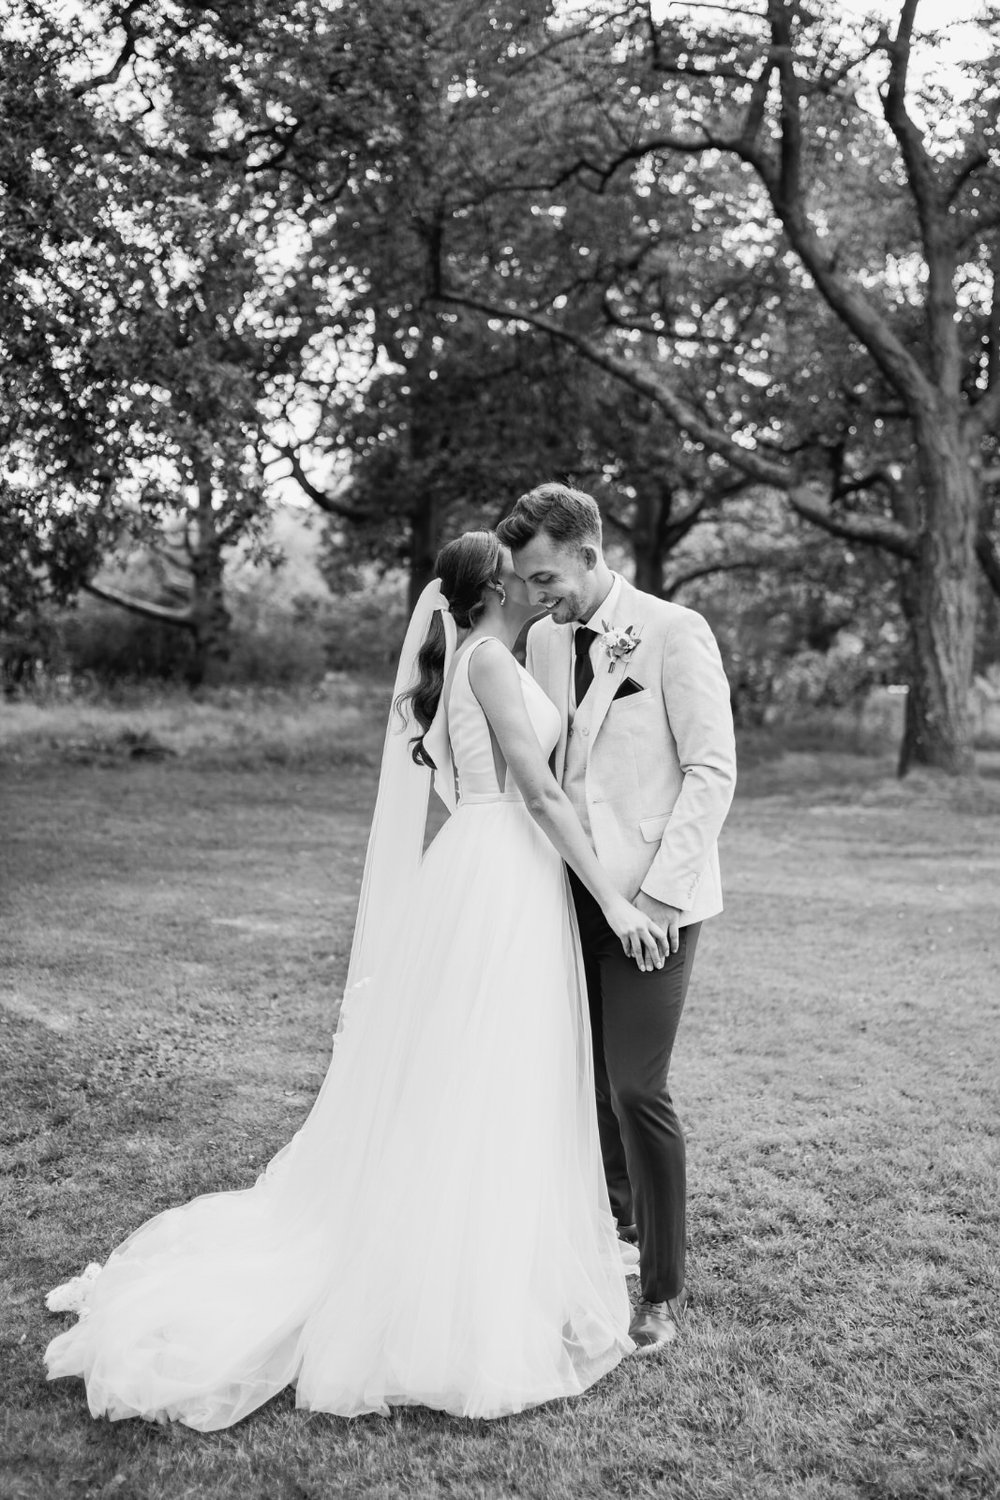 Bride and groom pose for elegant black and white wedding portrait as groom rests his forehead on bride's